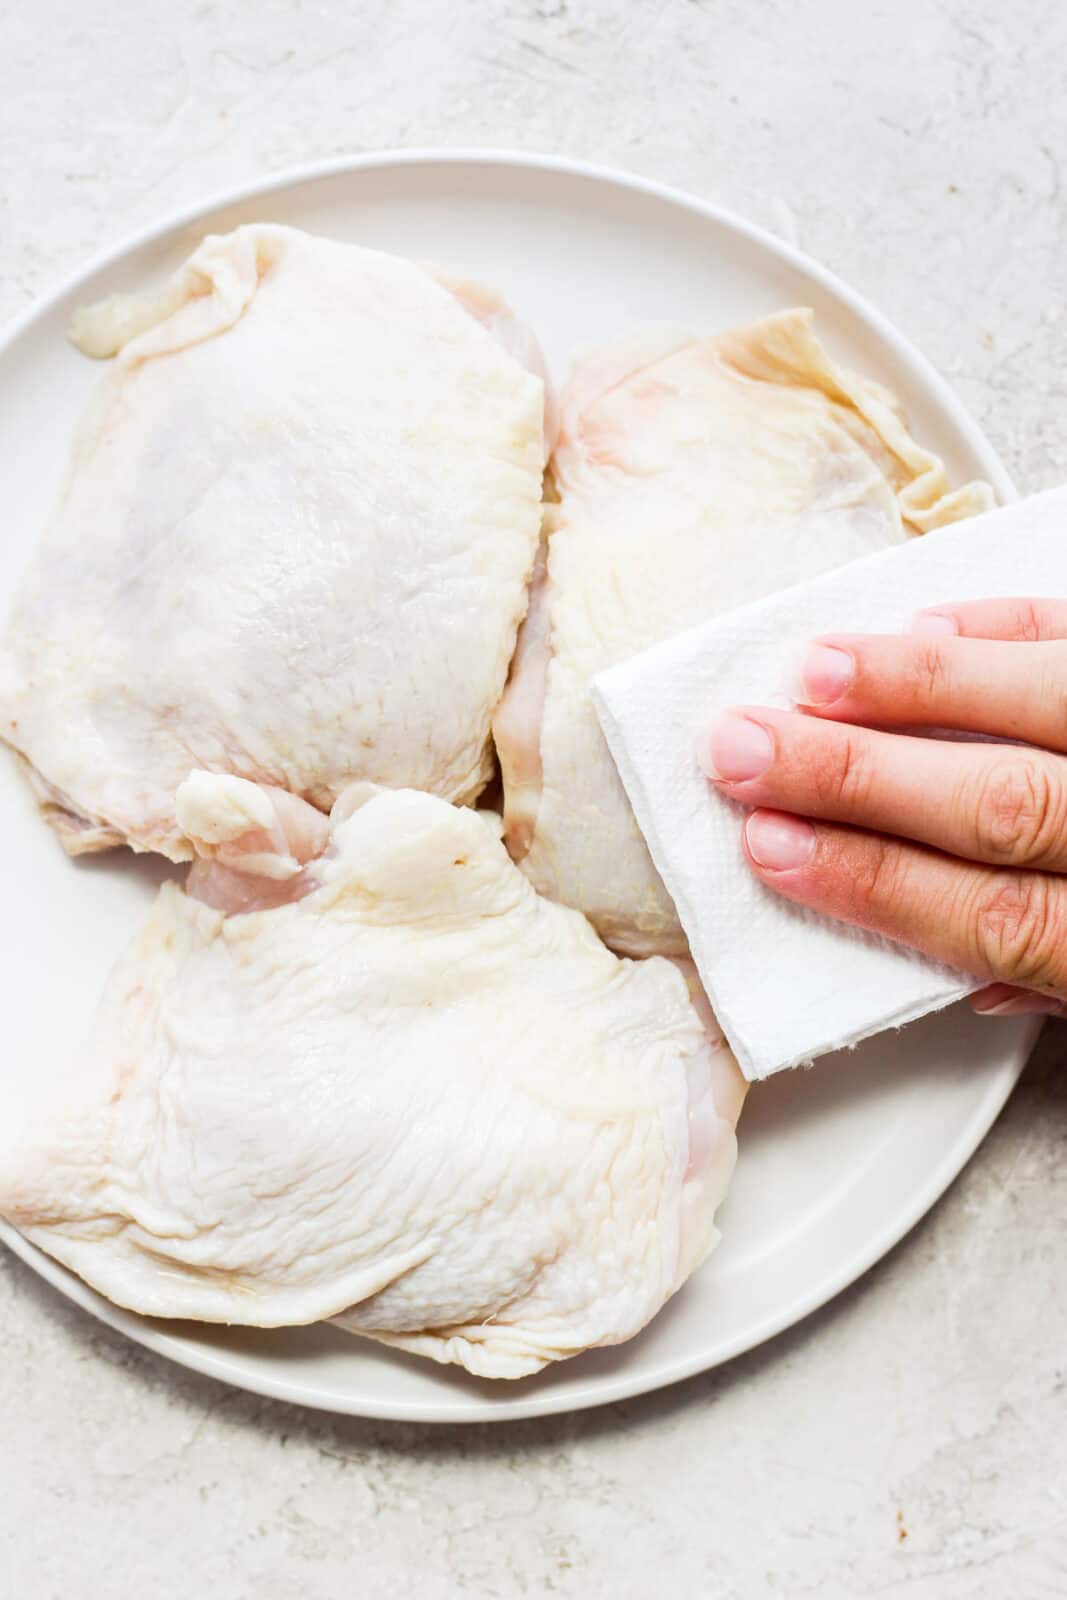 A hand patting dry a chicken thigh with a paper towel.